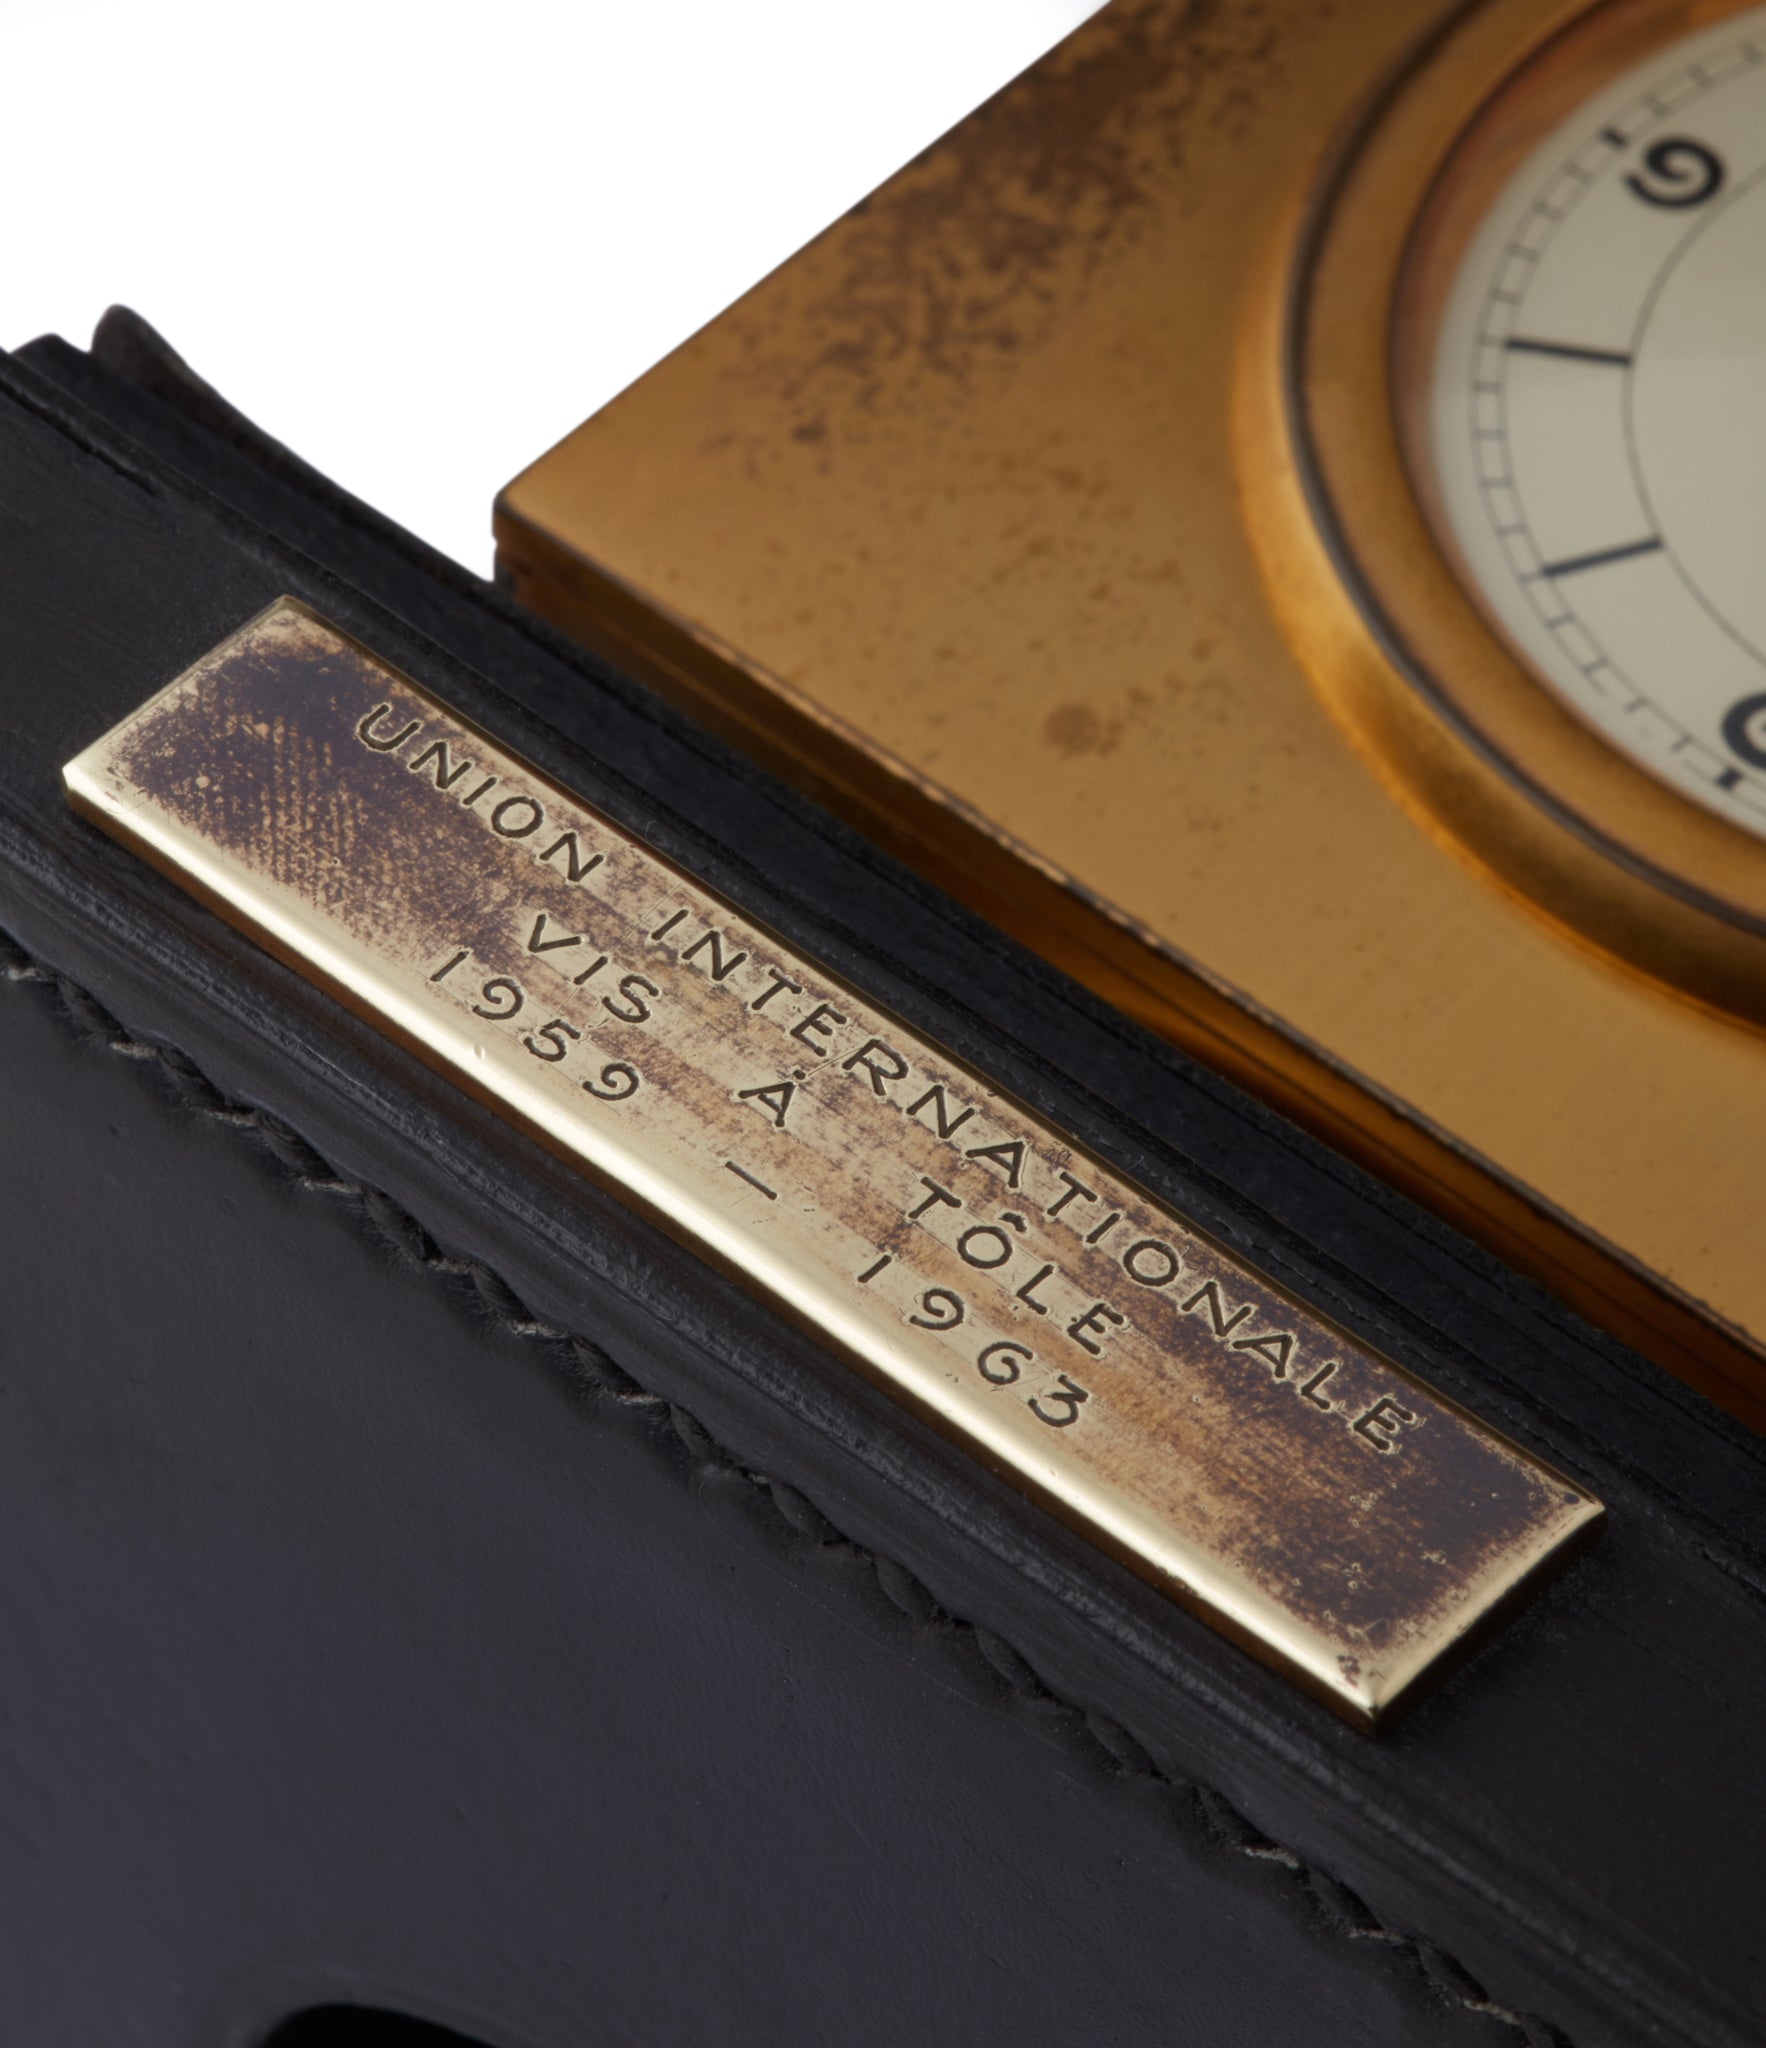 brass Hermes Paris Compendium 8-day Art Deco calendar desk clock for sale online at A Collected Man for collectors of rare objects